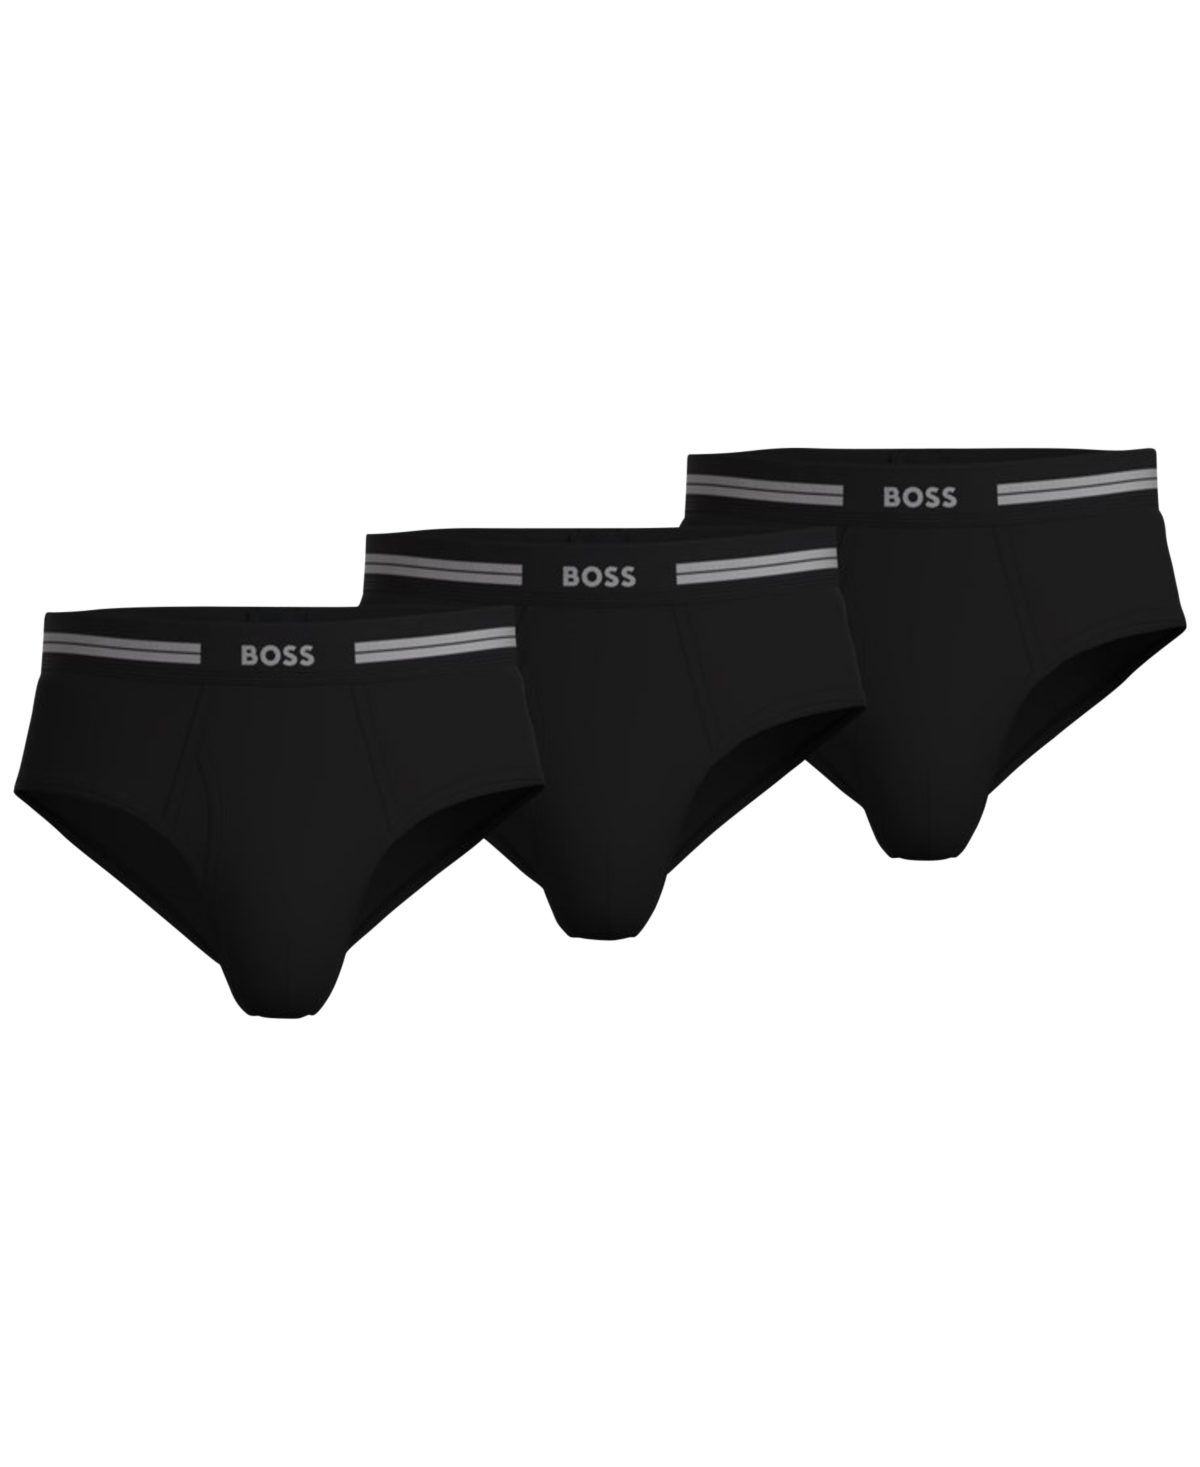 Boss by Hugo Boss Men's 3-Pk. Traditional Classic Solid Briefs - Black